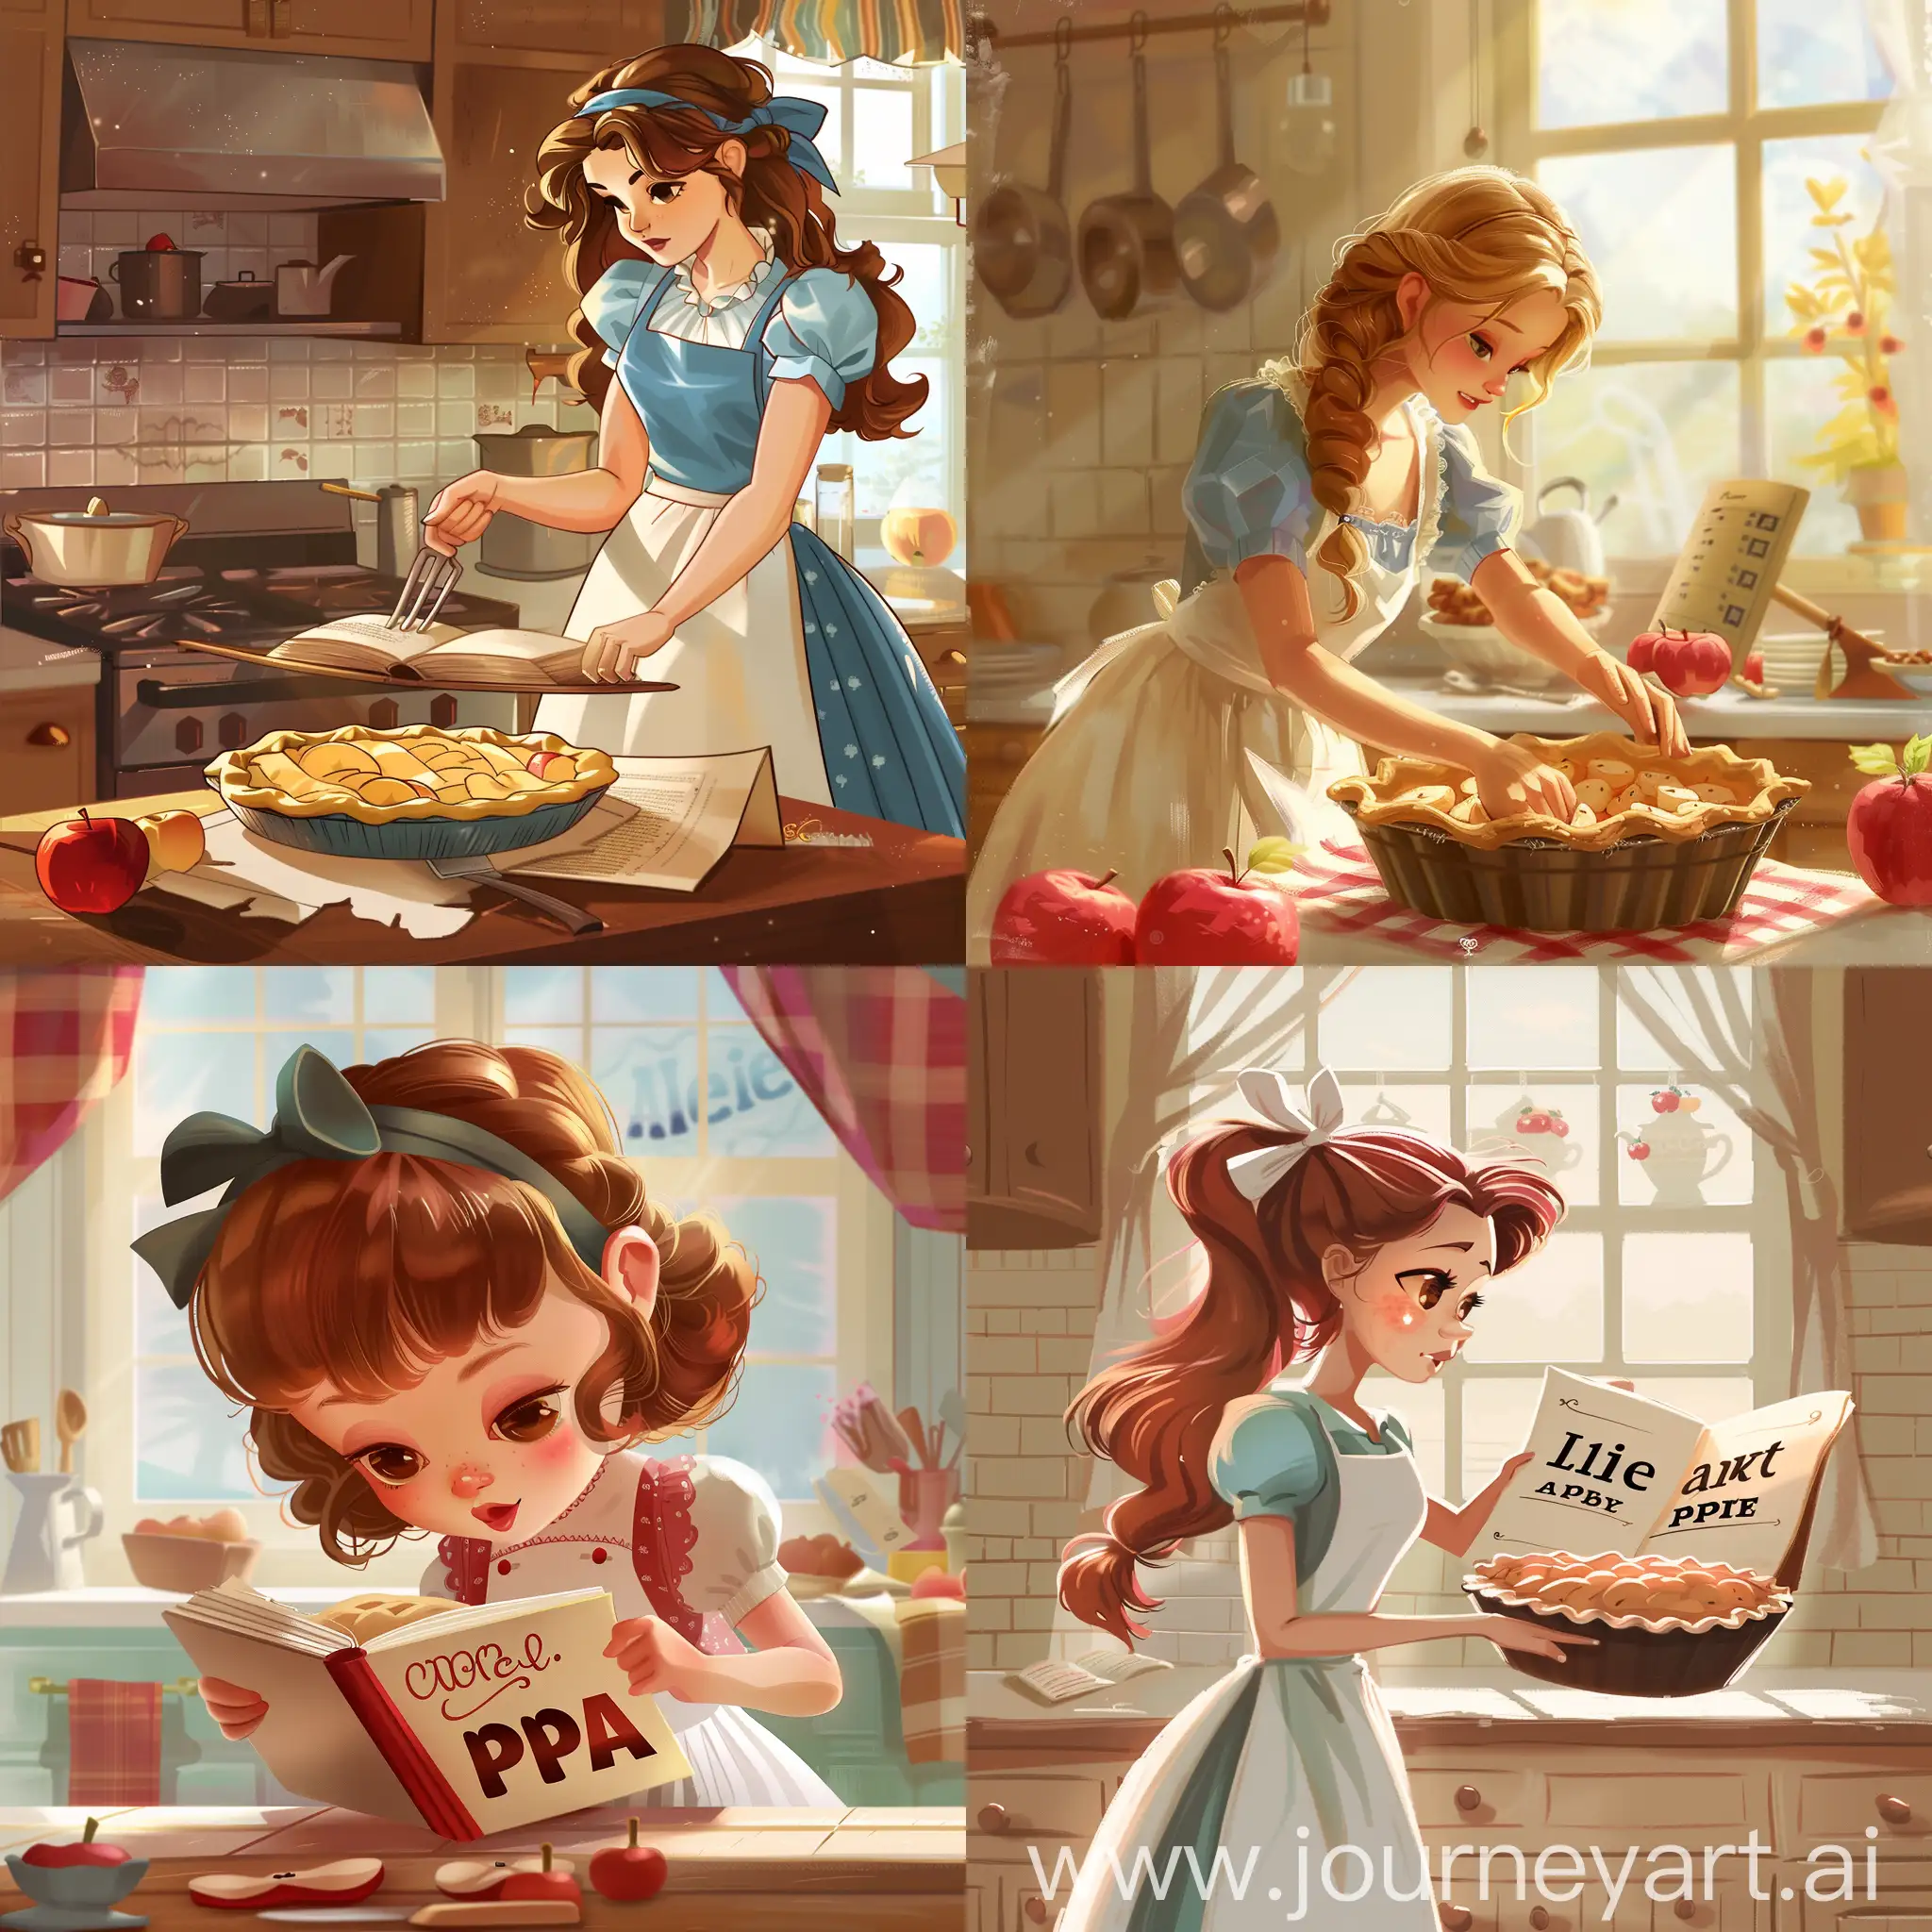 One sunny morning, as Alice was preparing to bake her famous apple pie for the upcoming contest, she encountered a peculiar problem. She reached for her recipe book, only to find that it was missing! Panic set in as Alice realized that without her cherished recipe, she wouldn't be able to create her award-winning pie.